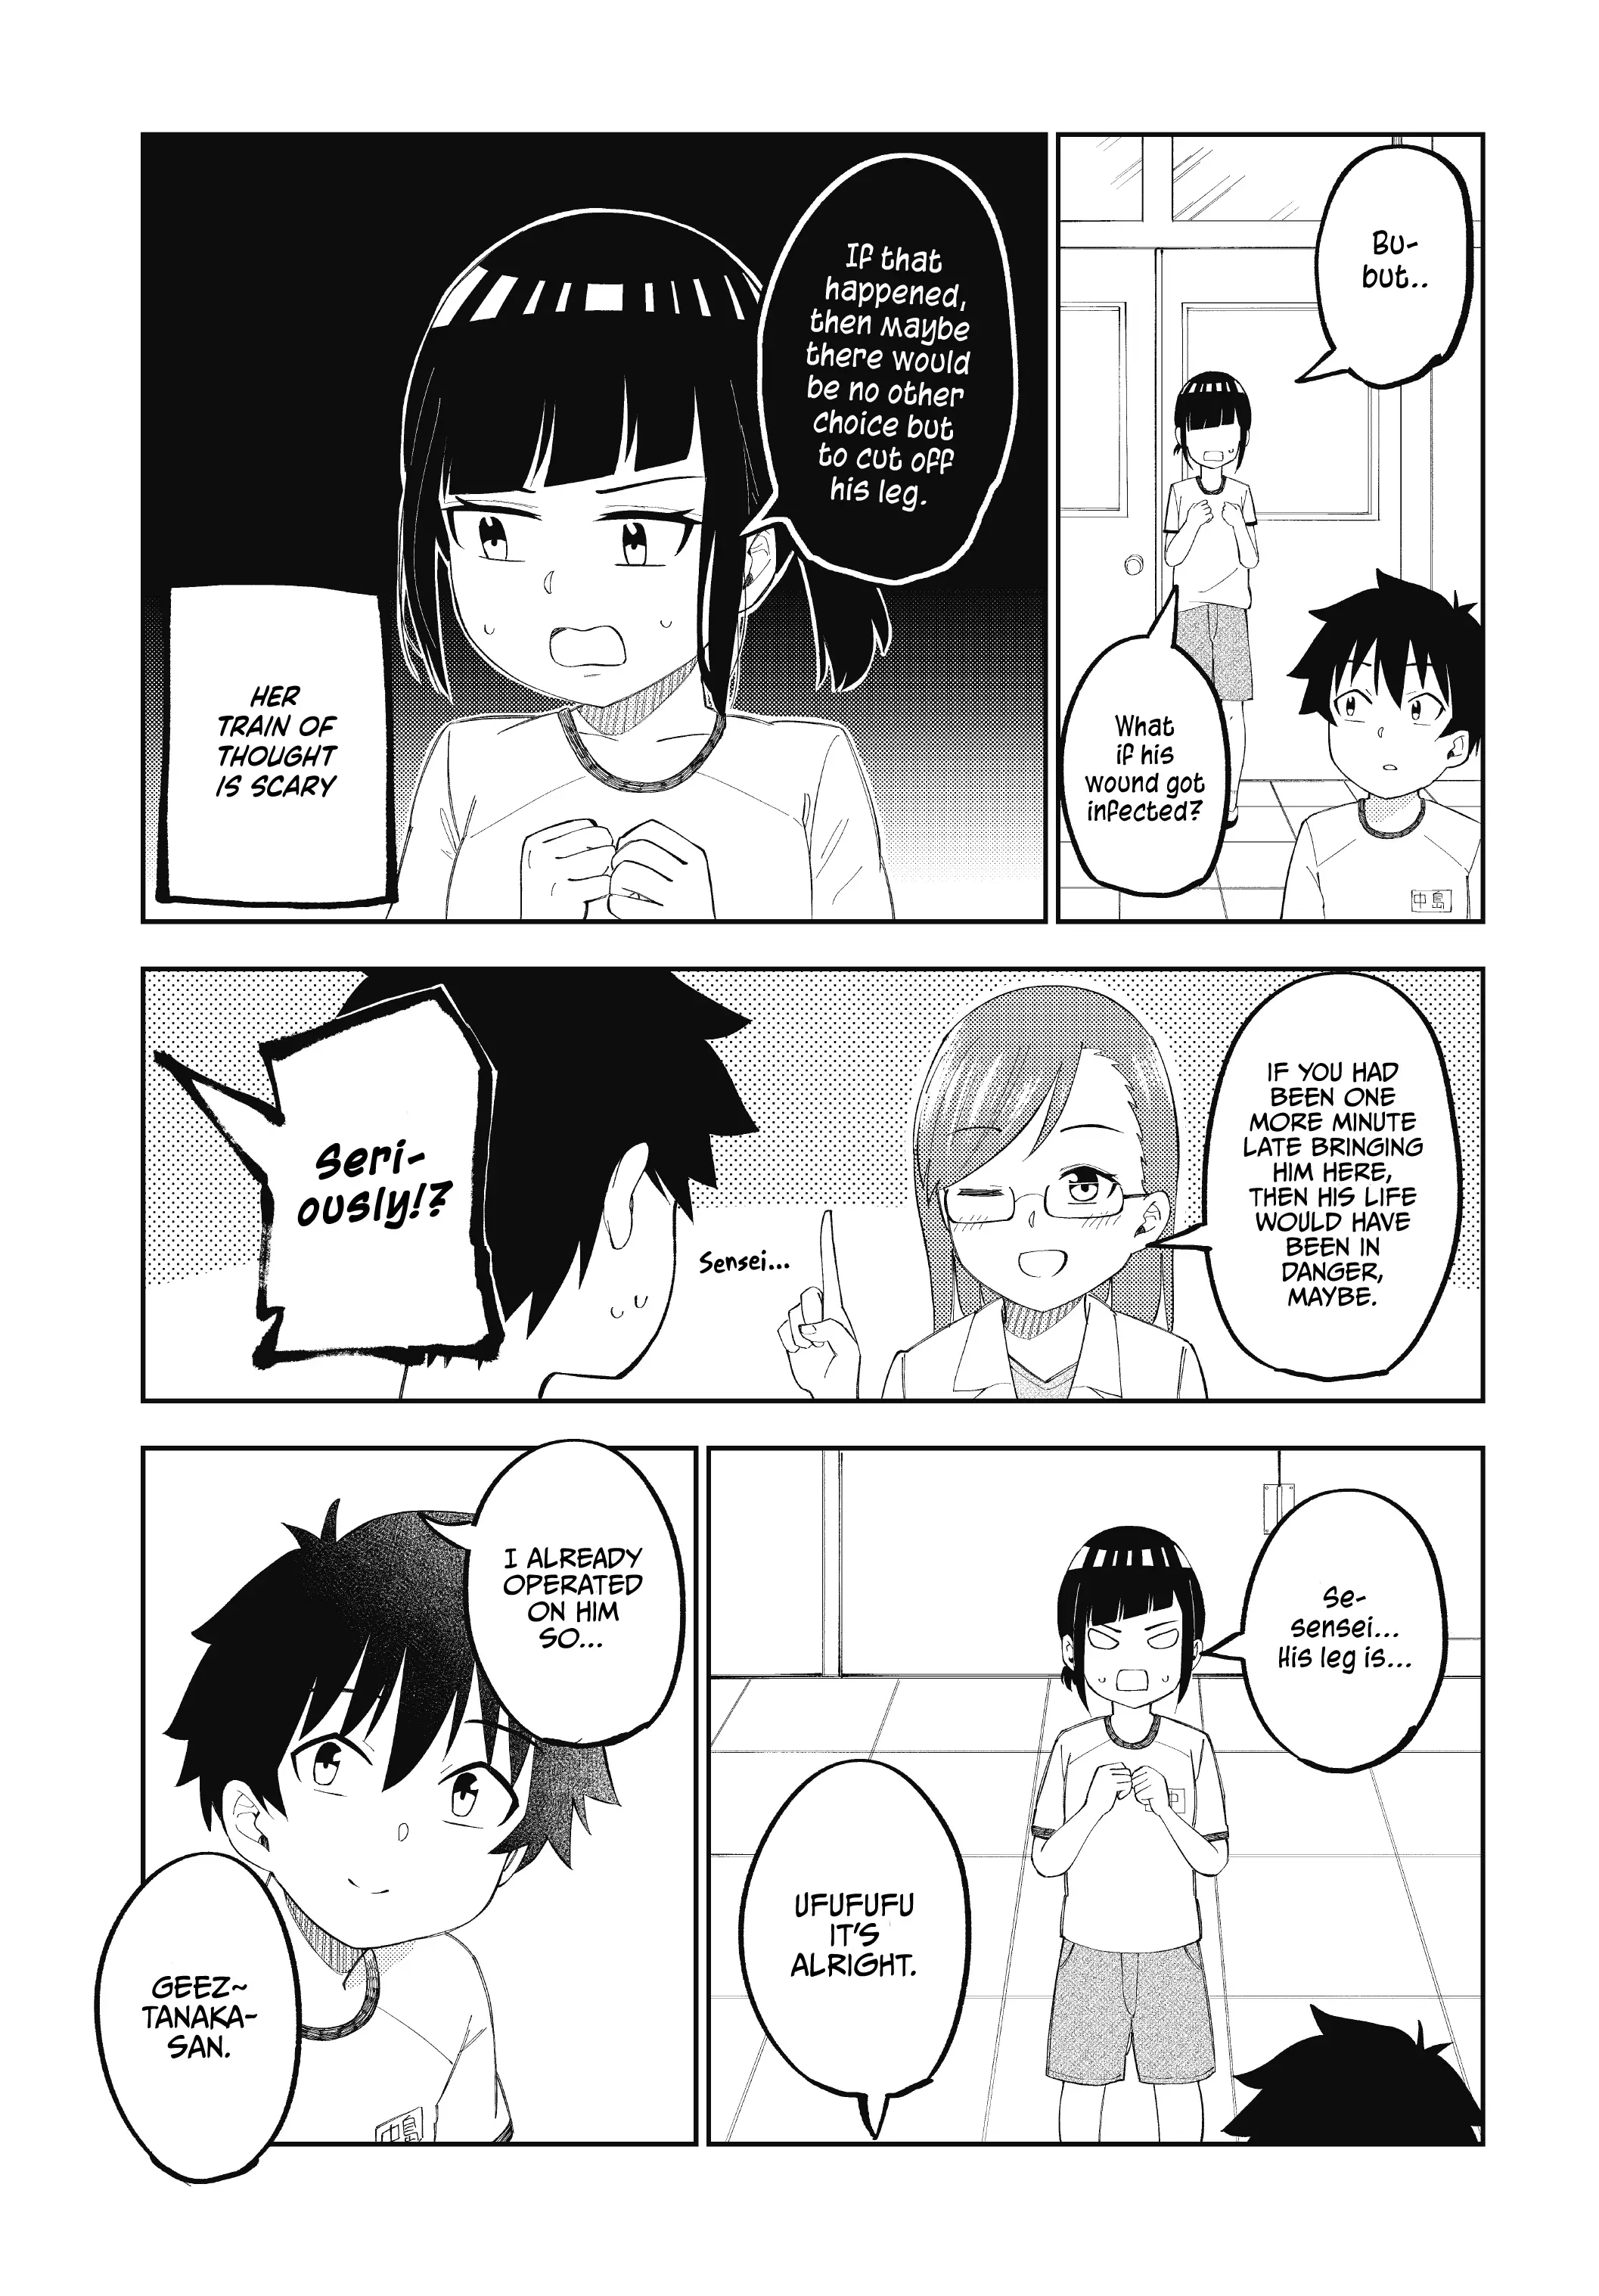 My Classmate Tanaka-San Is Super Scary - 24 page 4